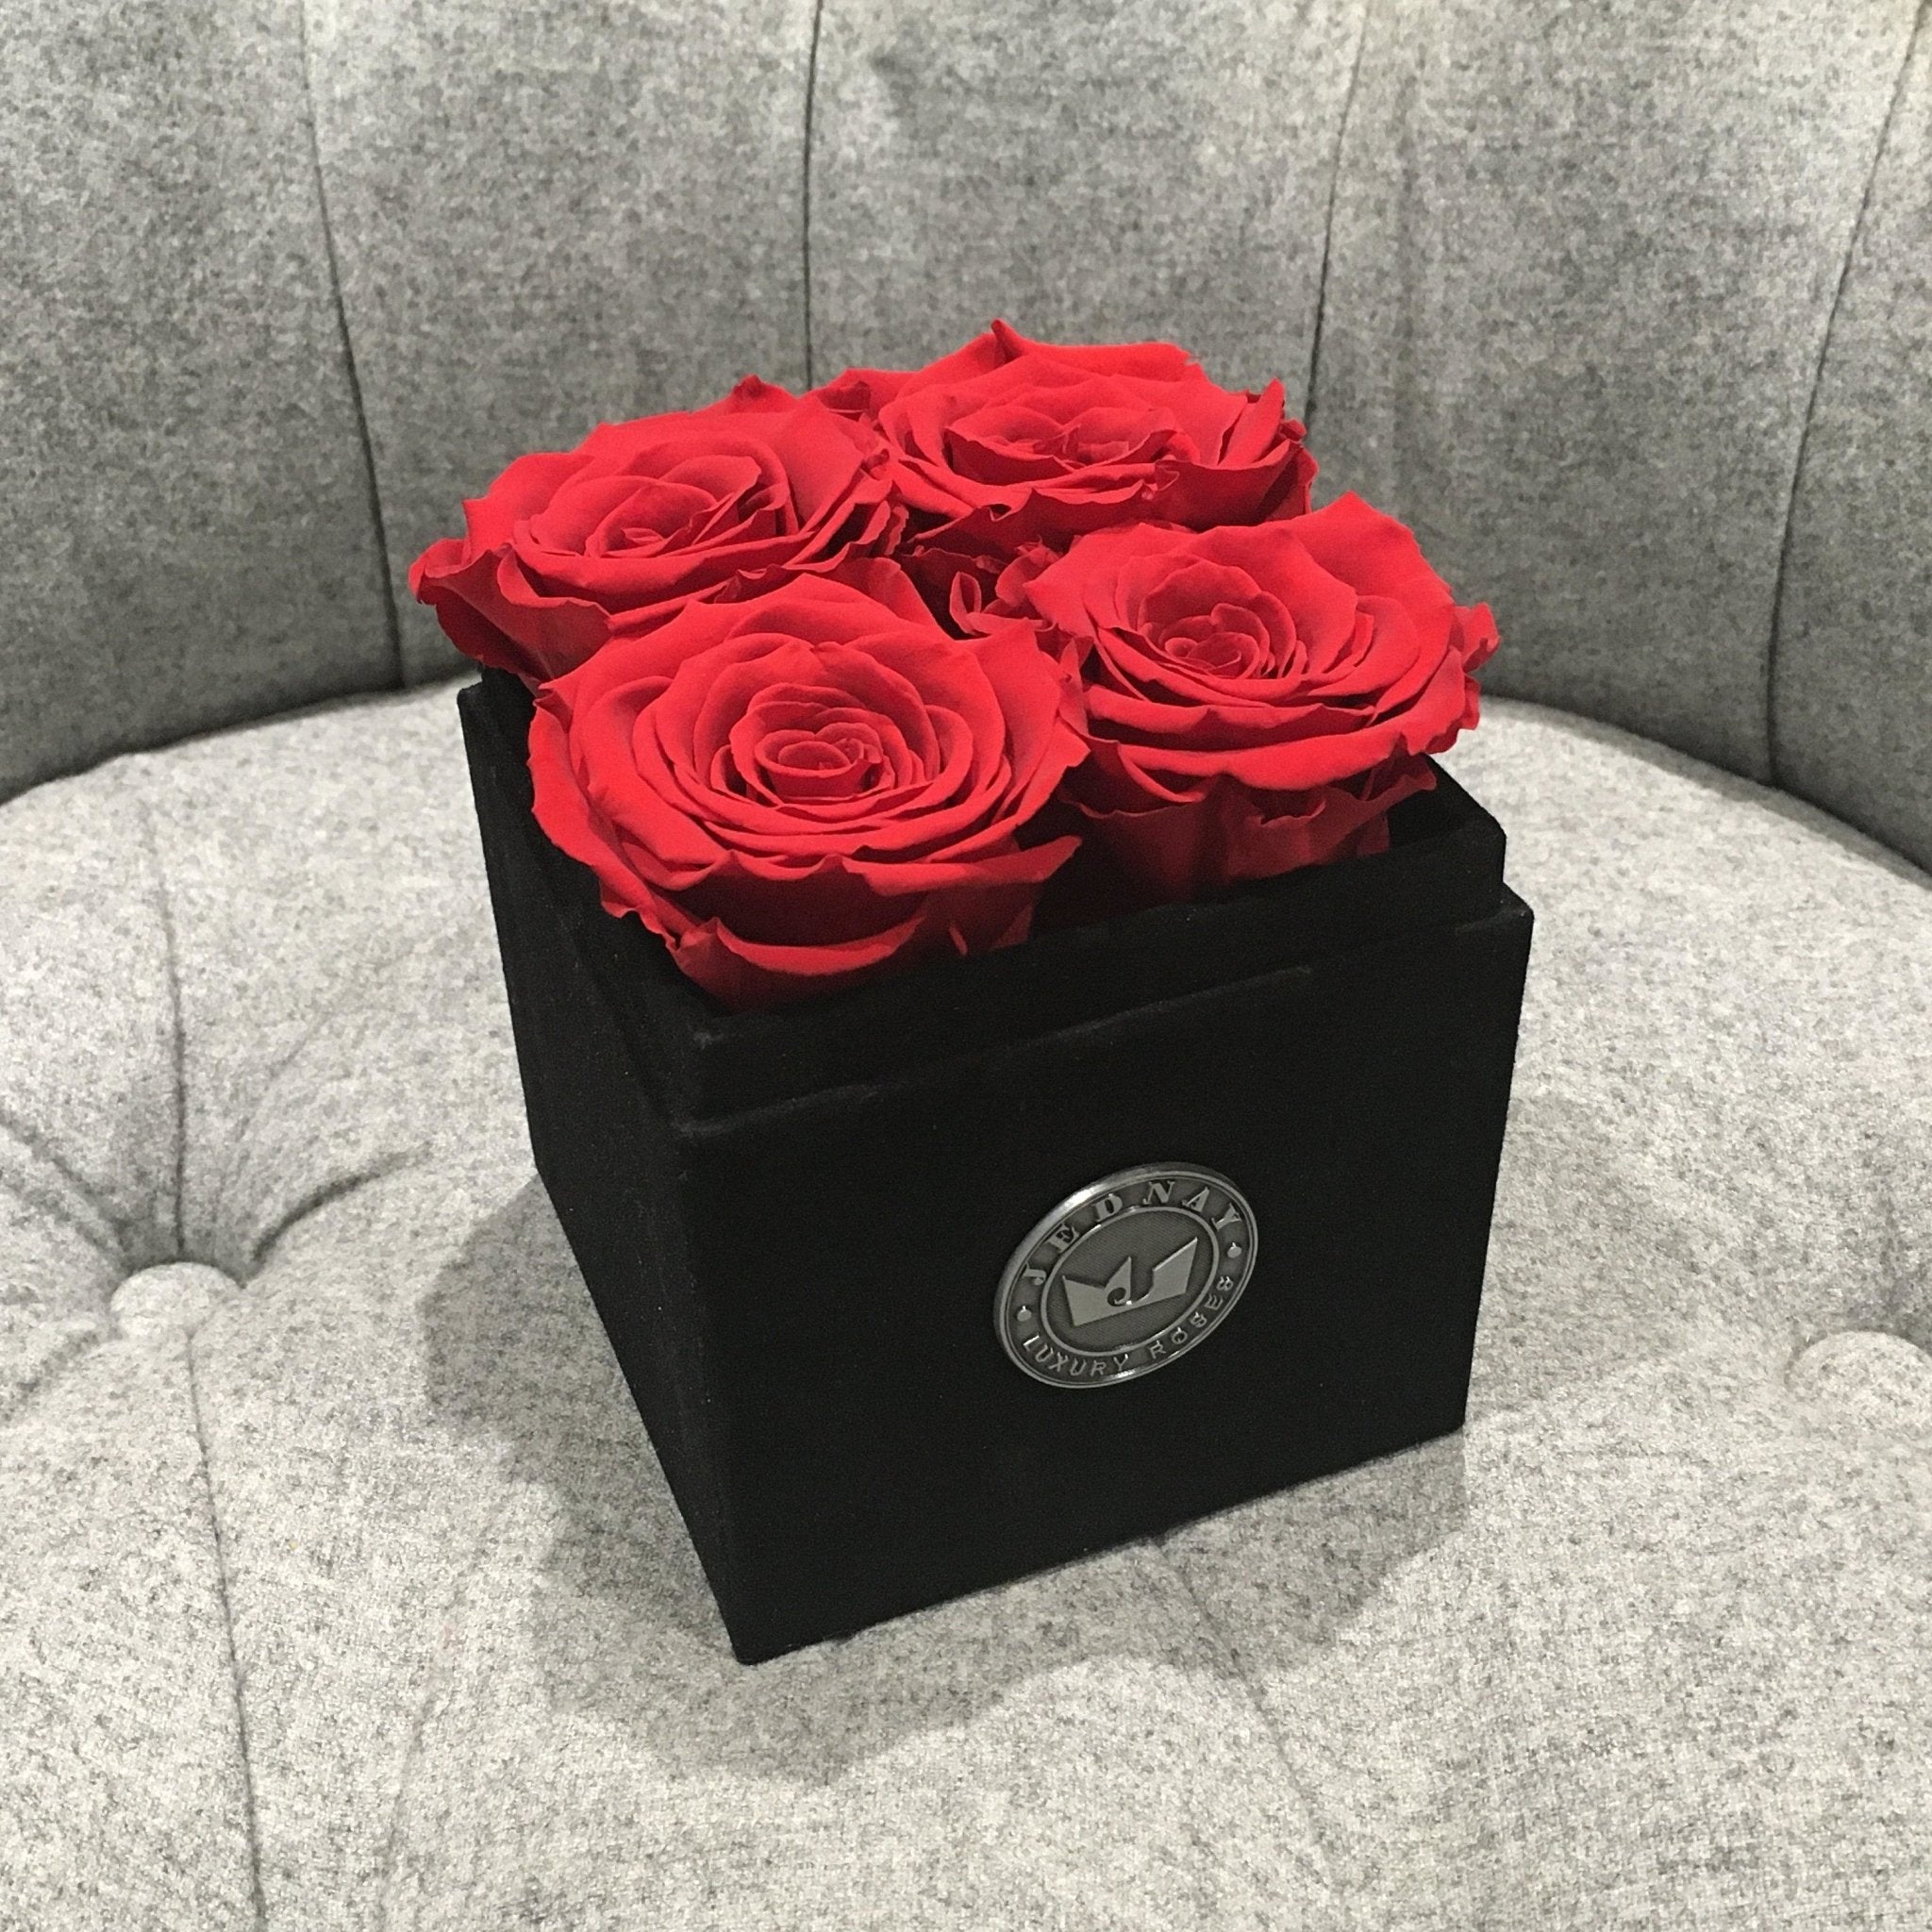 How Red Roses Can Make Weddings Greener - Jednay Roses